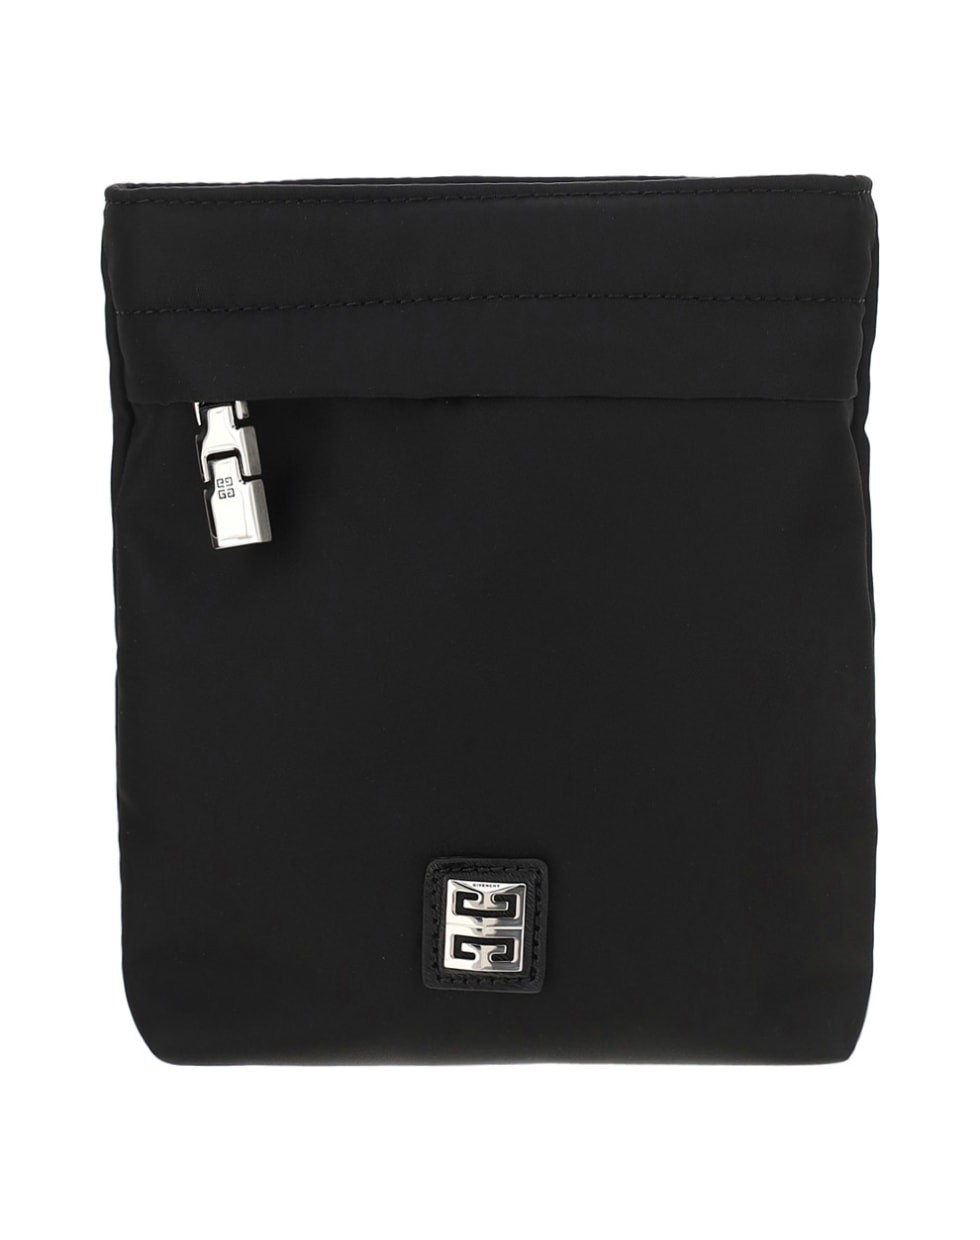 Givenchy Phone Pouch - Black